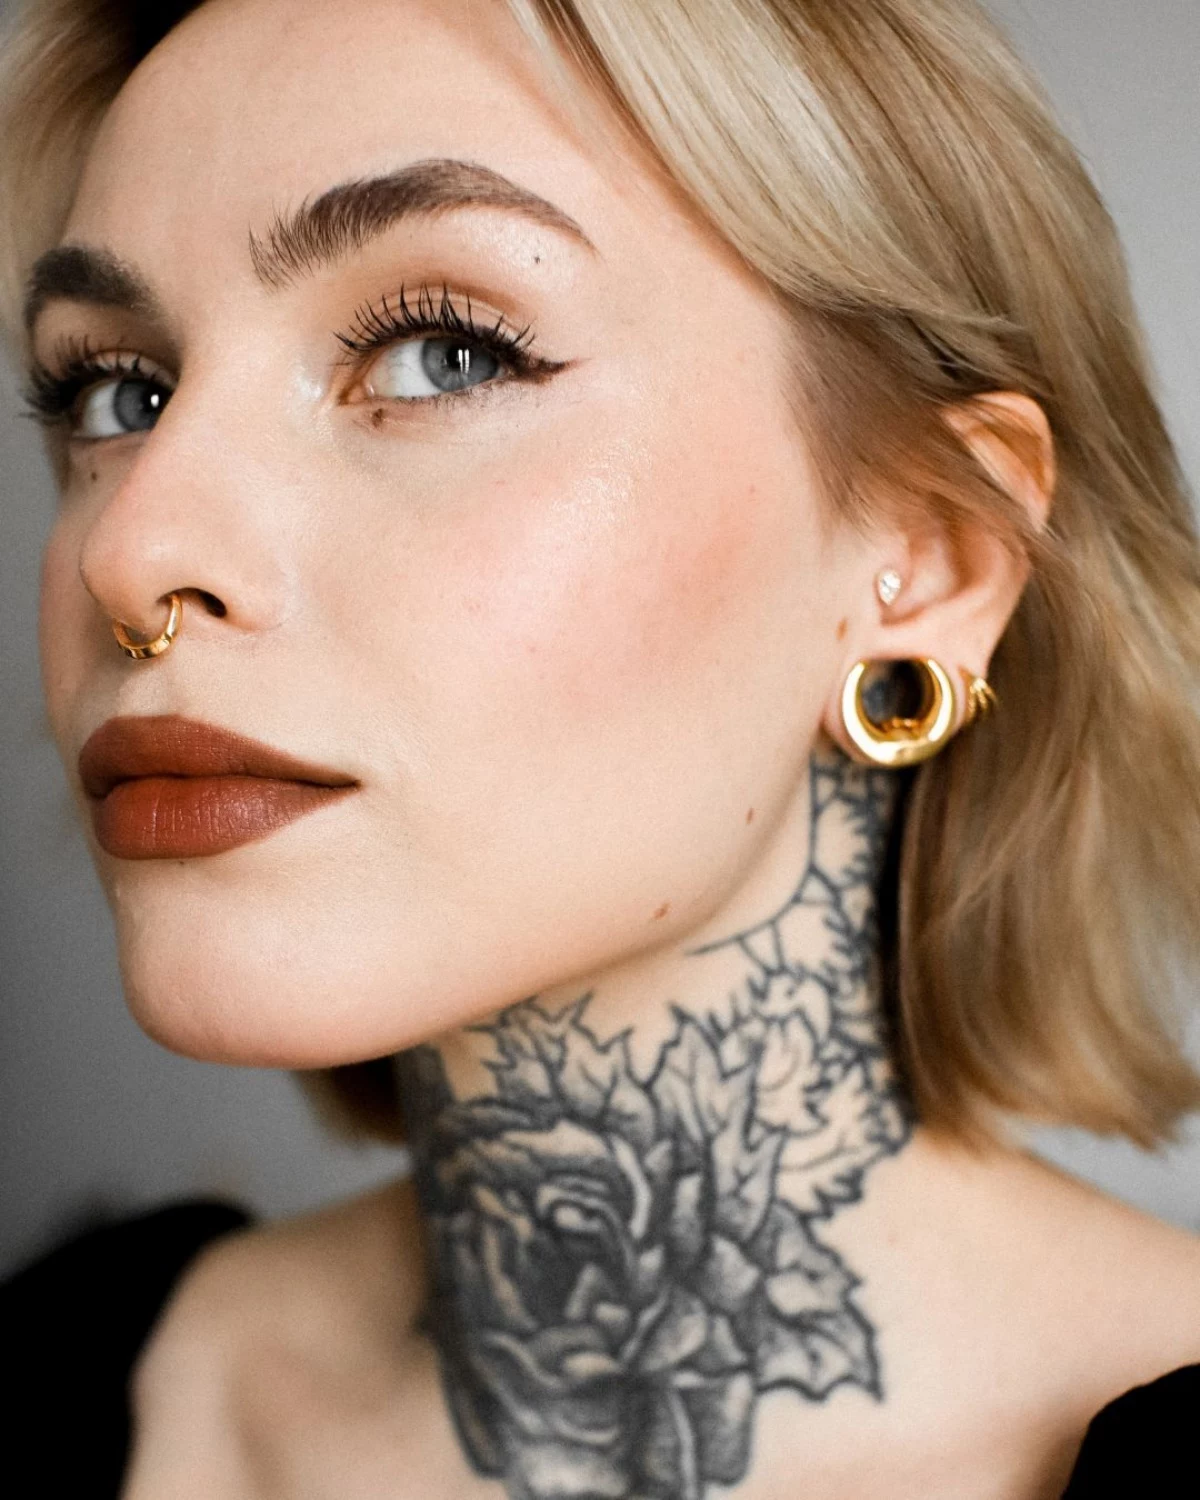 septum piercing woman with tattoo and piercing